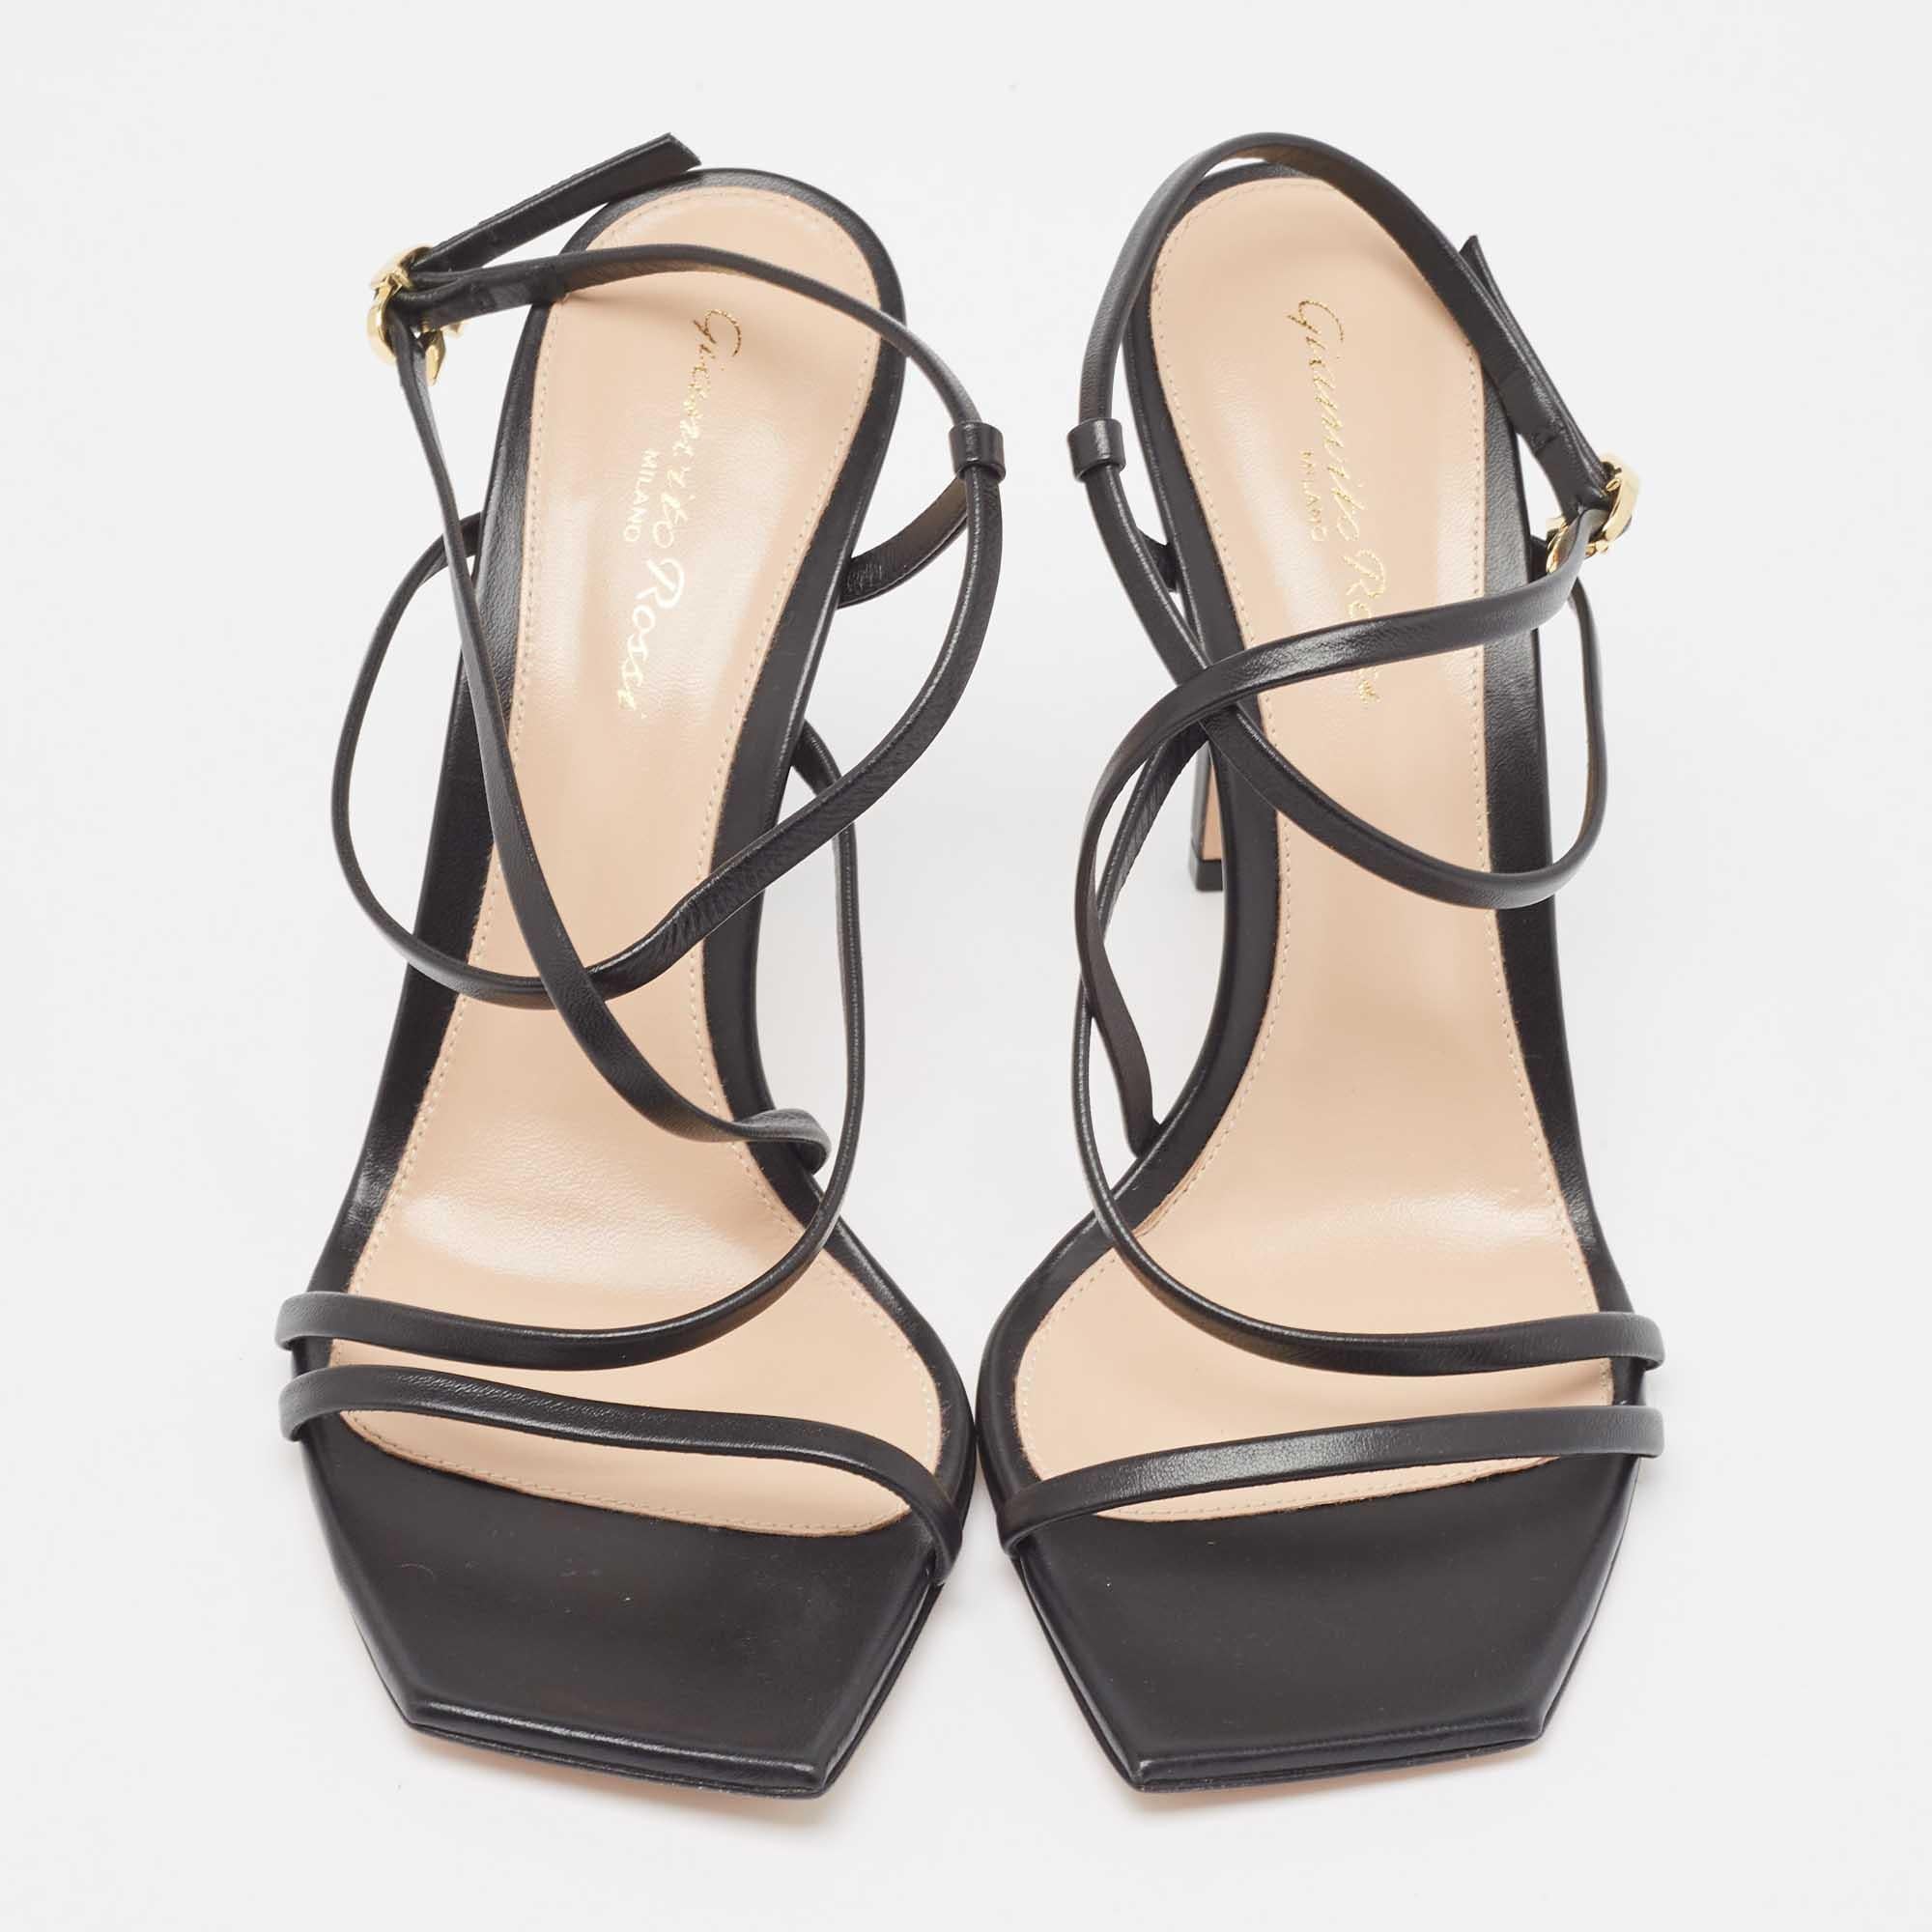 In classy black leather, the Gianvito Rossi Manilla sandals exude confident charm. Delicate straps gracefully embrace the foot, while a sturdy heel provides stability and style. With impeccable craftsmanship and timeless design, these sandals